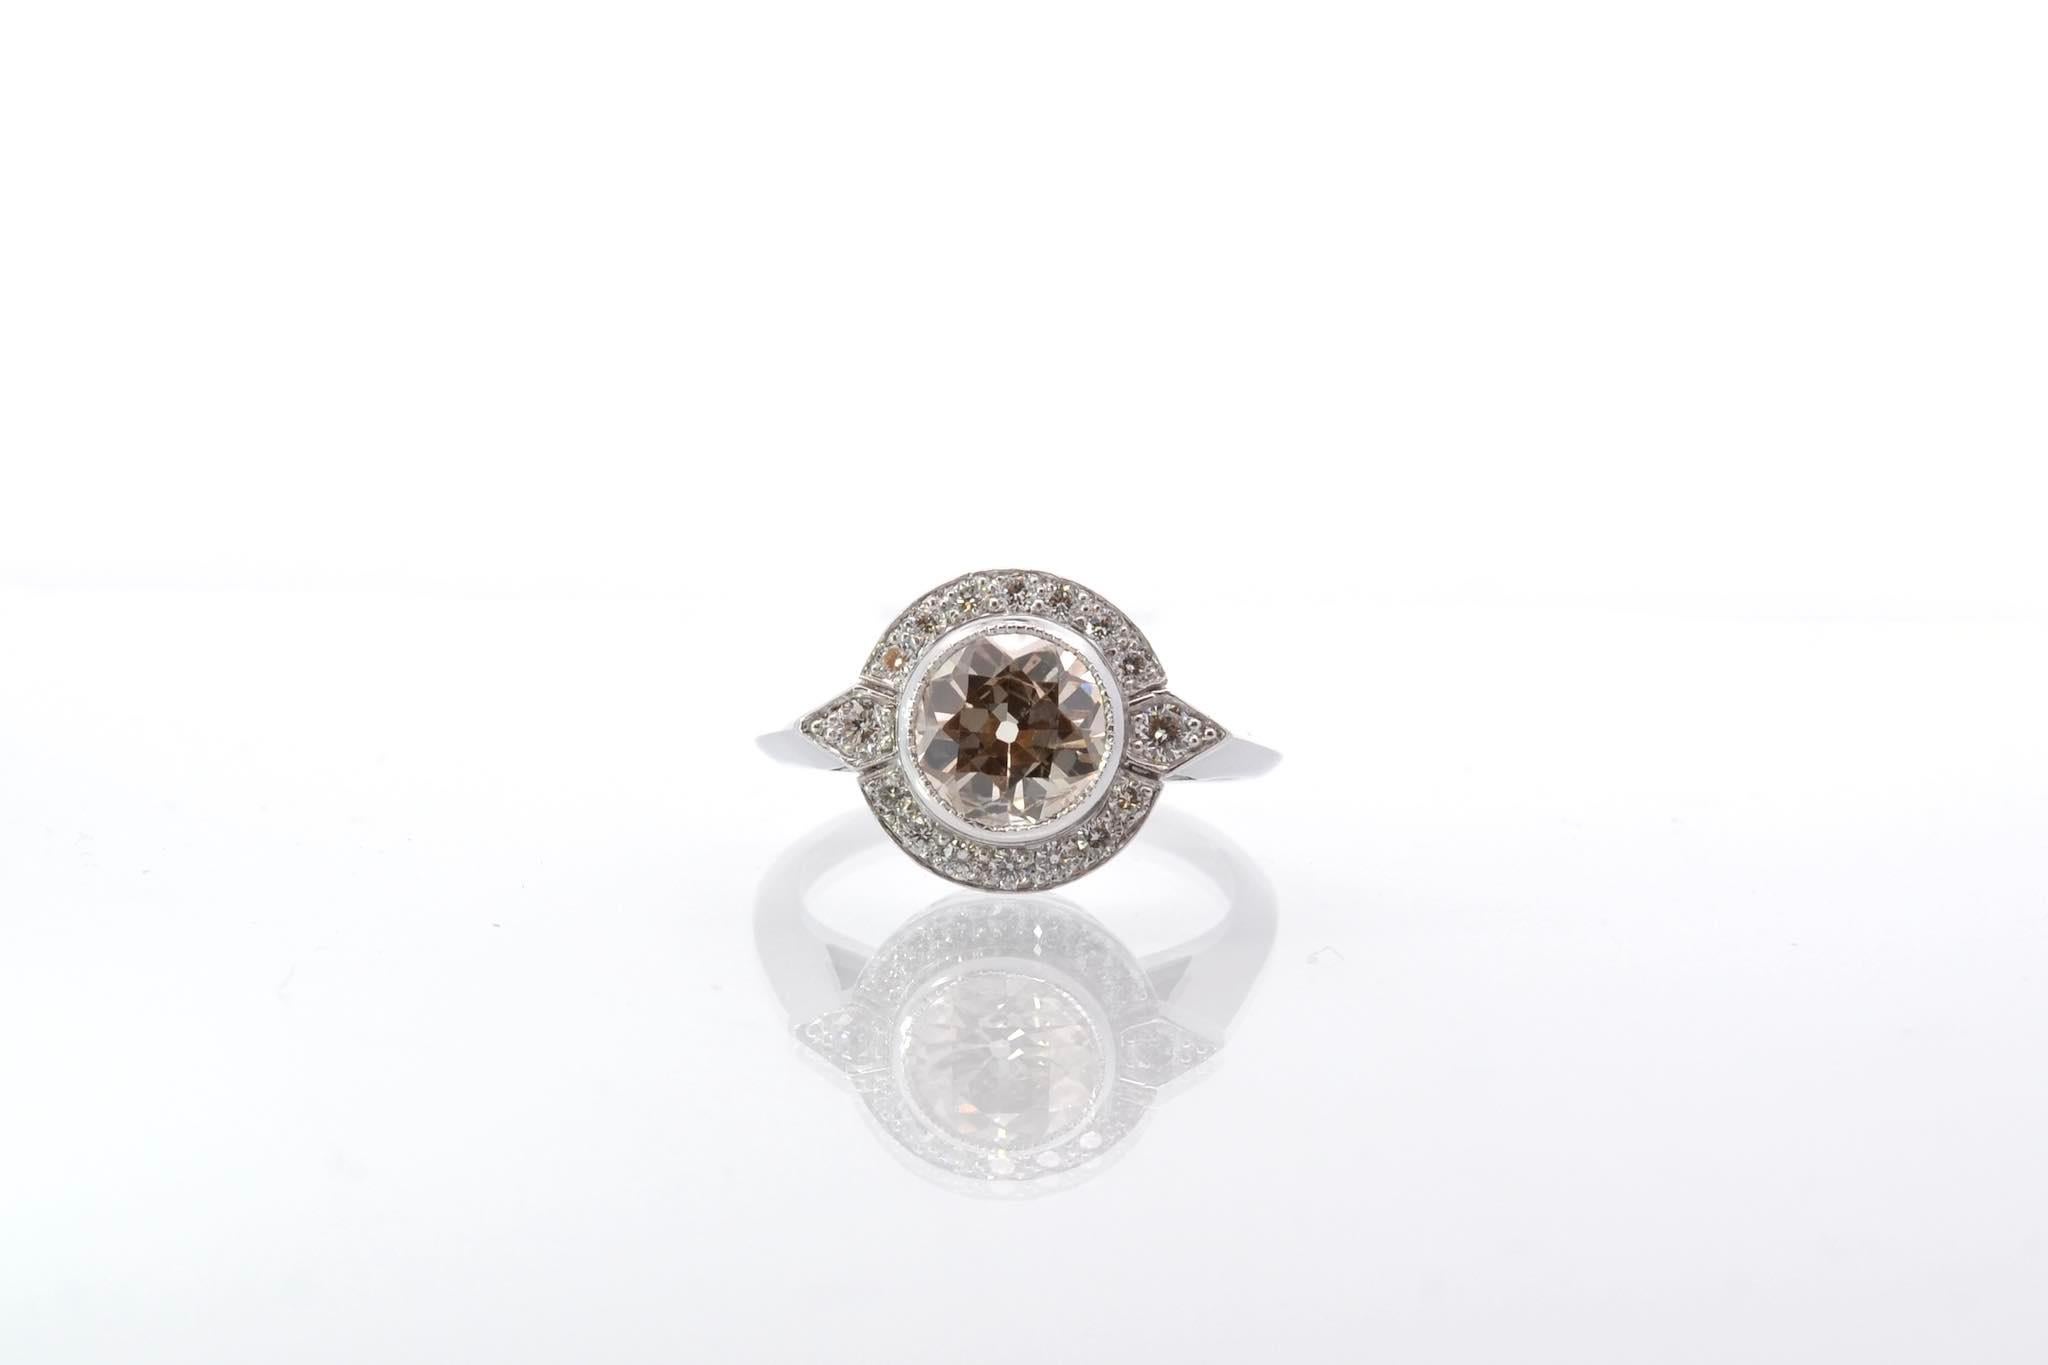 Stones: Central diamond: 1.78 cts NR/P1 and 16 surrounding diamonds
Material: Platinum
Weight: 6.2g
Period: Recent vintage style
Size: 54 (free sizing)
Certificate
Ref. : 25507